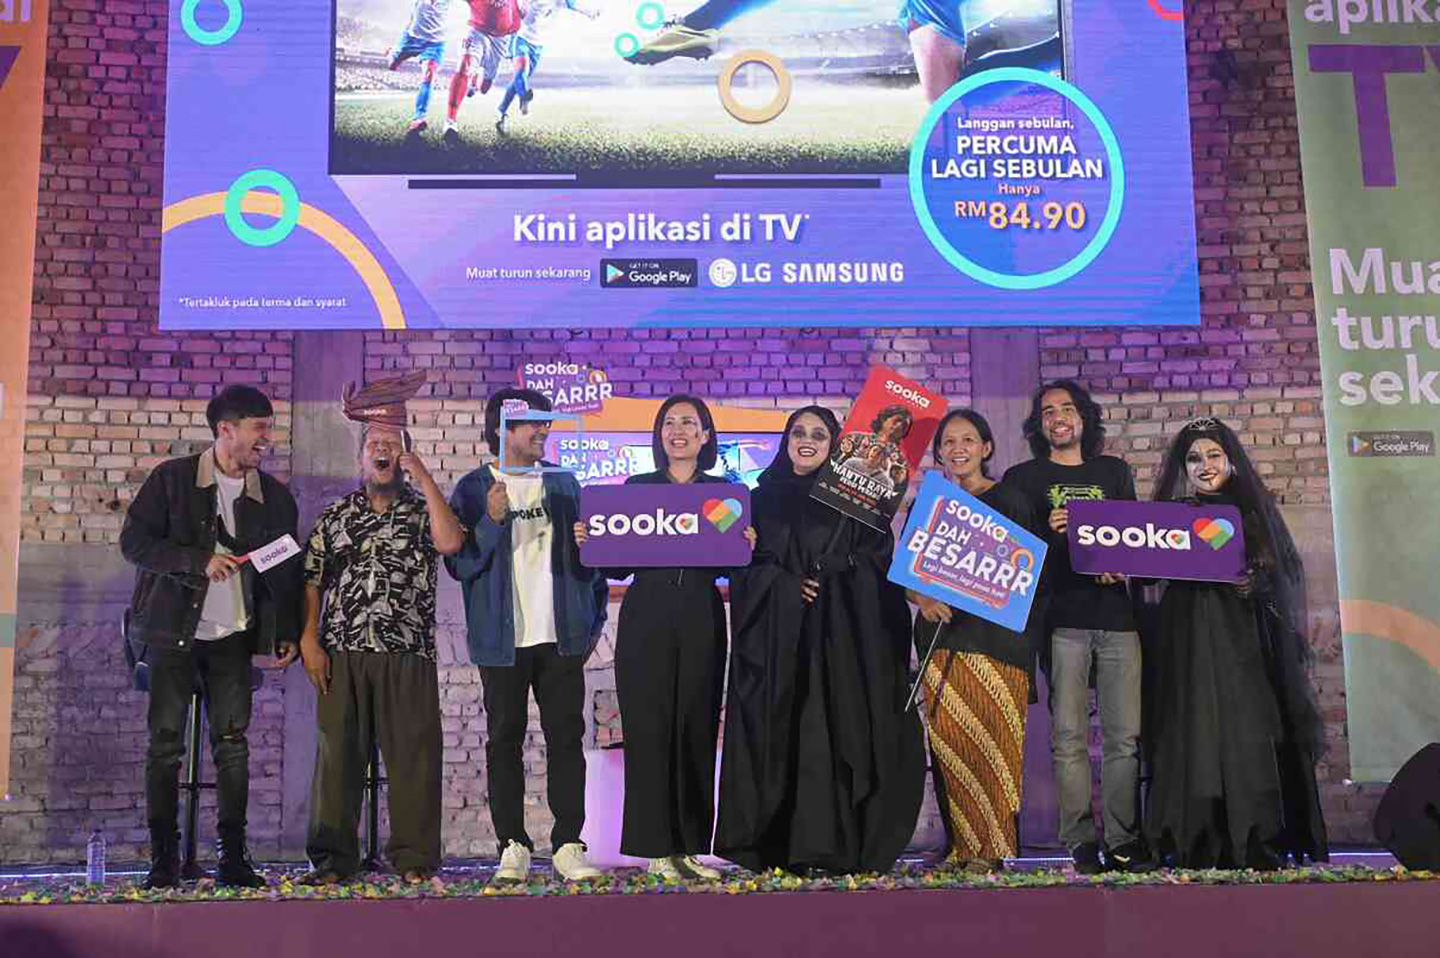 Entertainment Sooka celebrates first year in Malaysia with VIP TV plan for Smart TVs and new original series